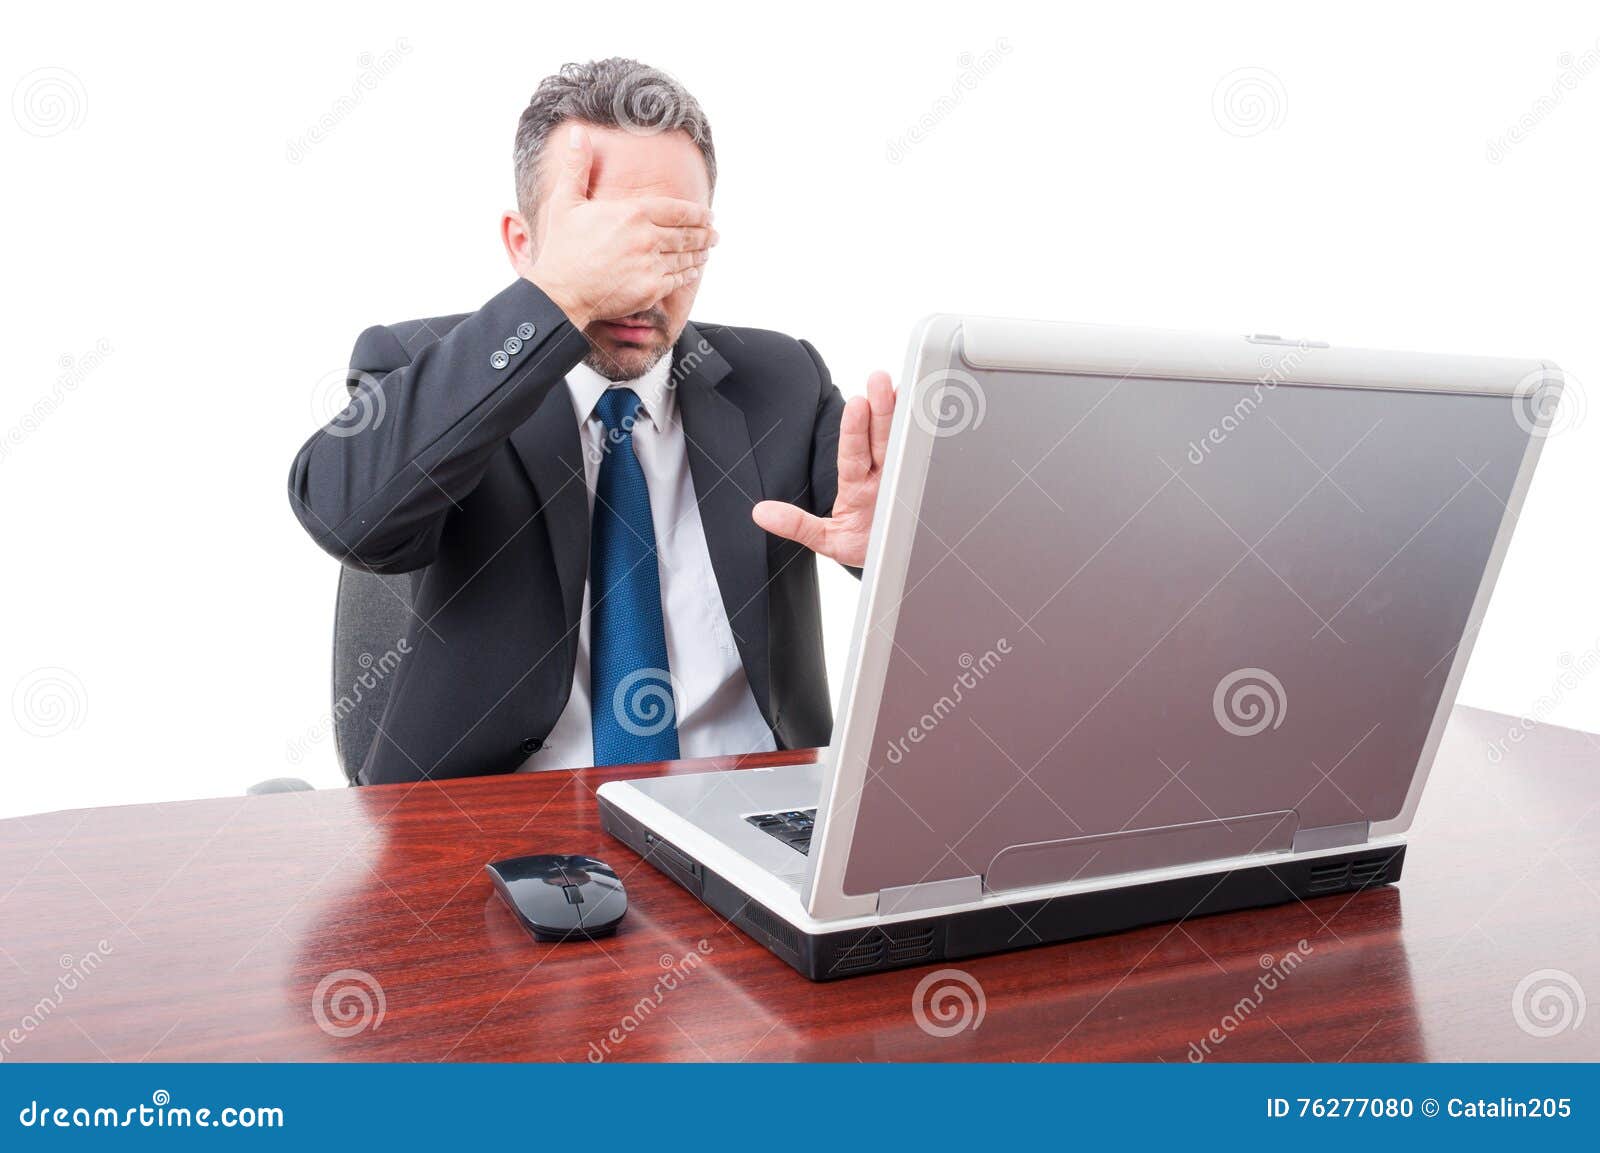 scared-embaressed-broker-covering-eyes-refusing-to-watch-computer-isolated-white-background-76277080.jpg